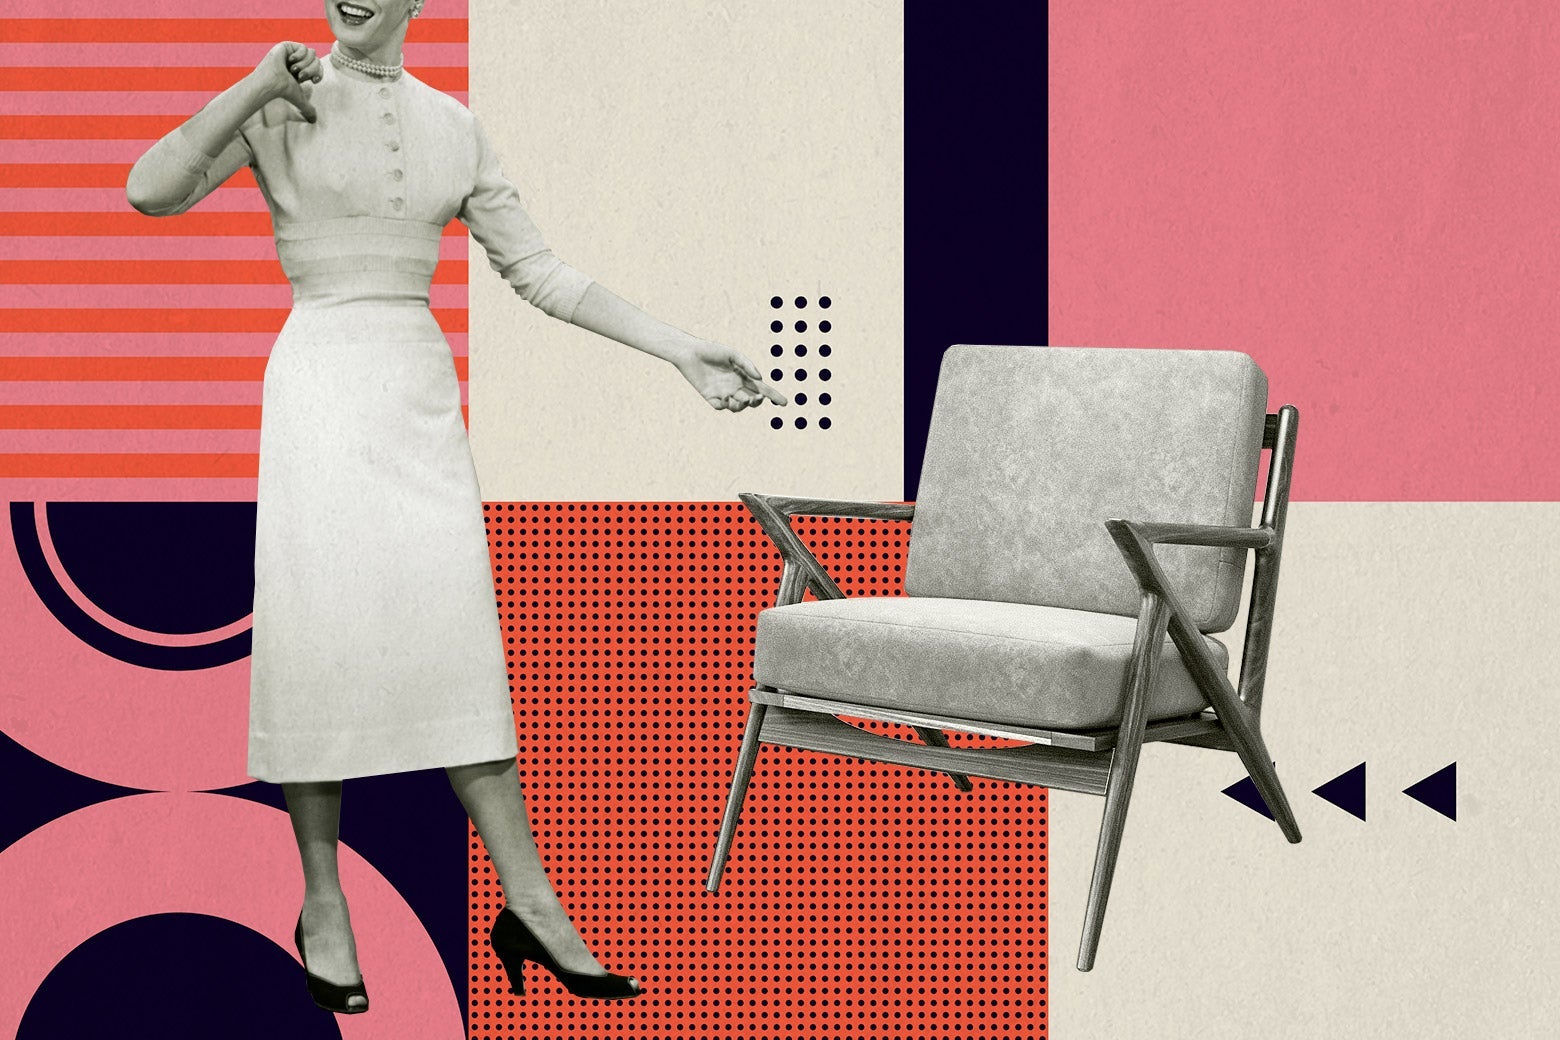 A white woman wearing pearls, a prim tight-waisted dress, and heels smiles and points at a midcentury modern chair against a colorful background of midcentury modern geometric patterns